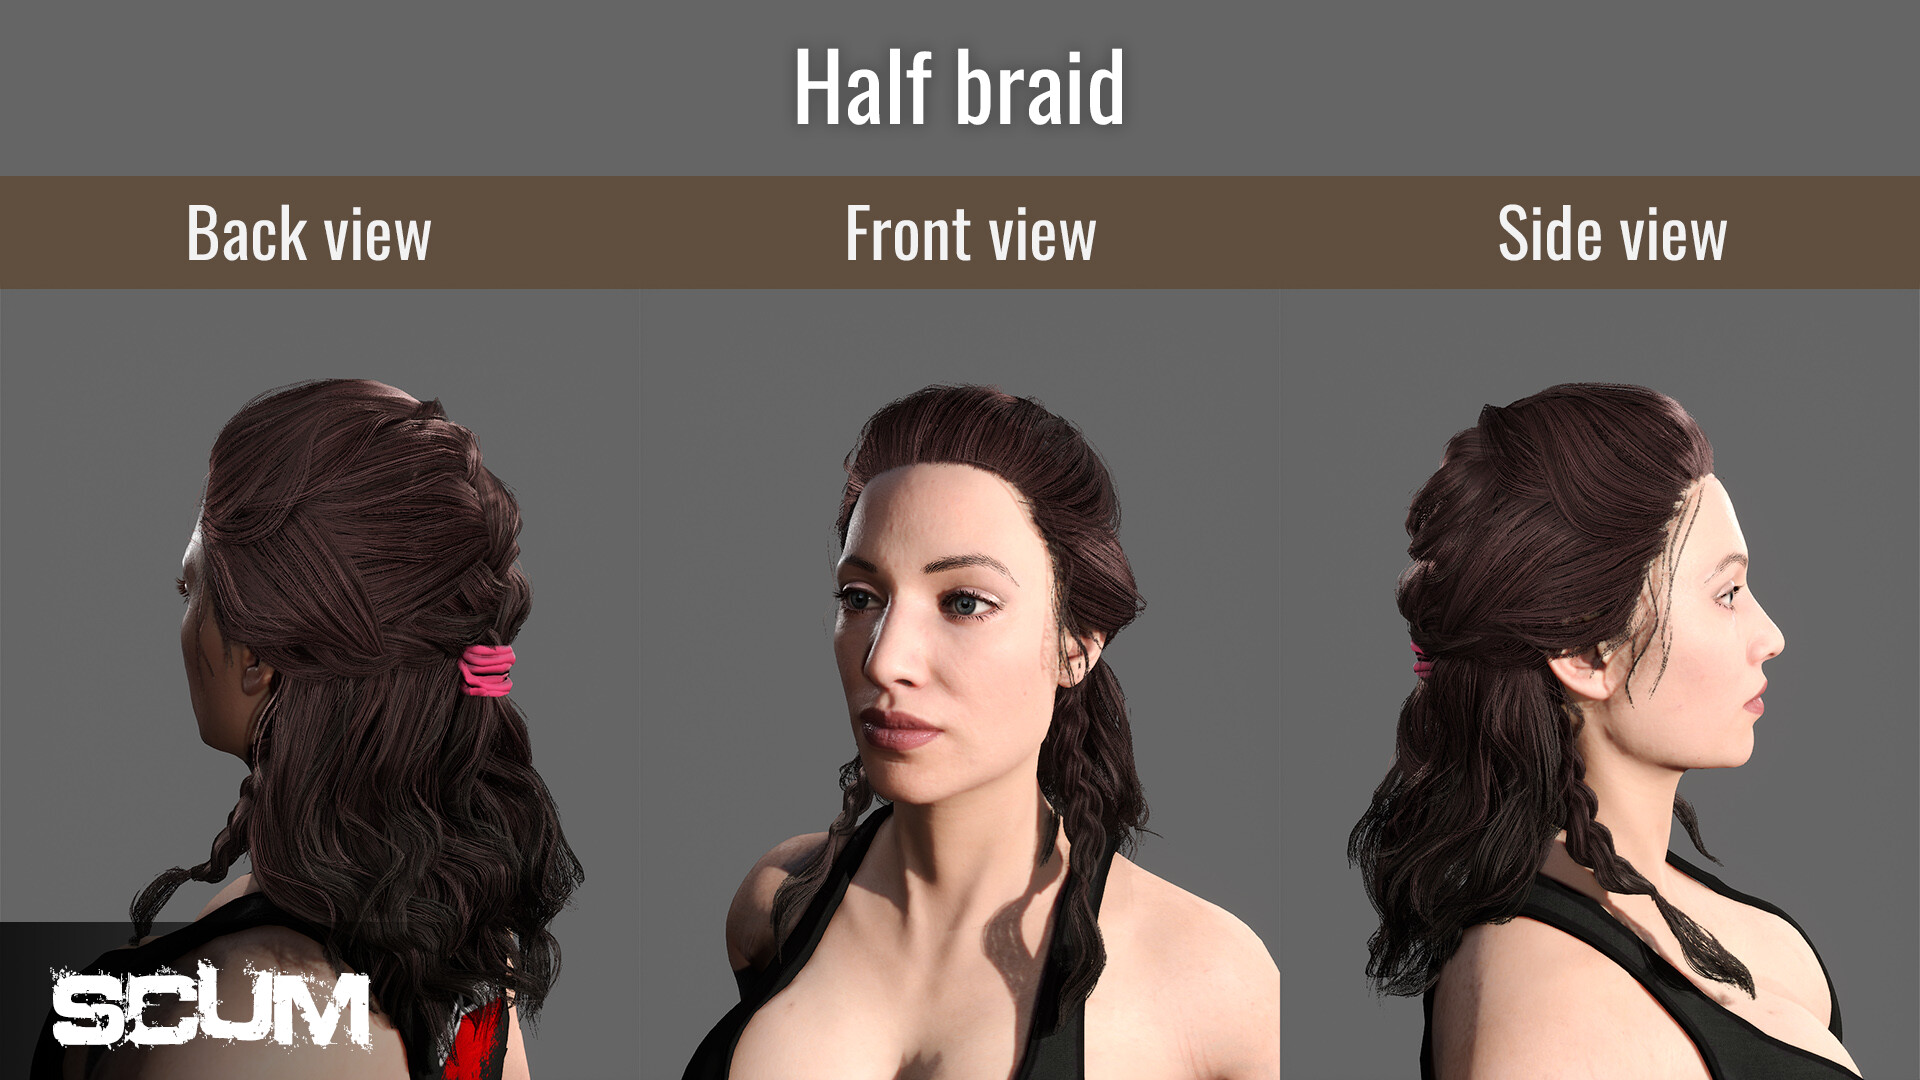 Anime Hairstyles Pack (9 types of hairstyles)